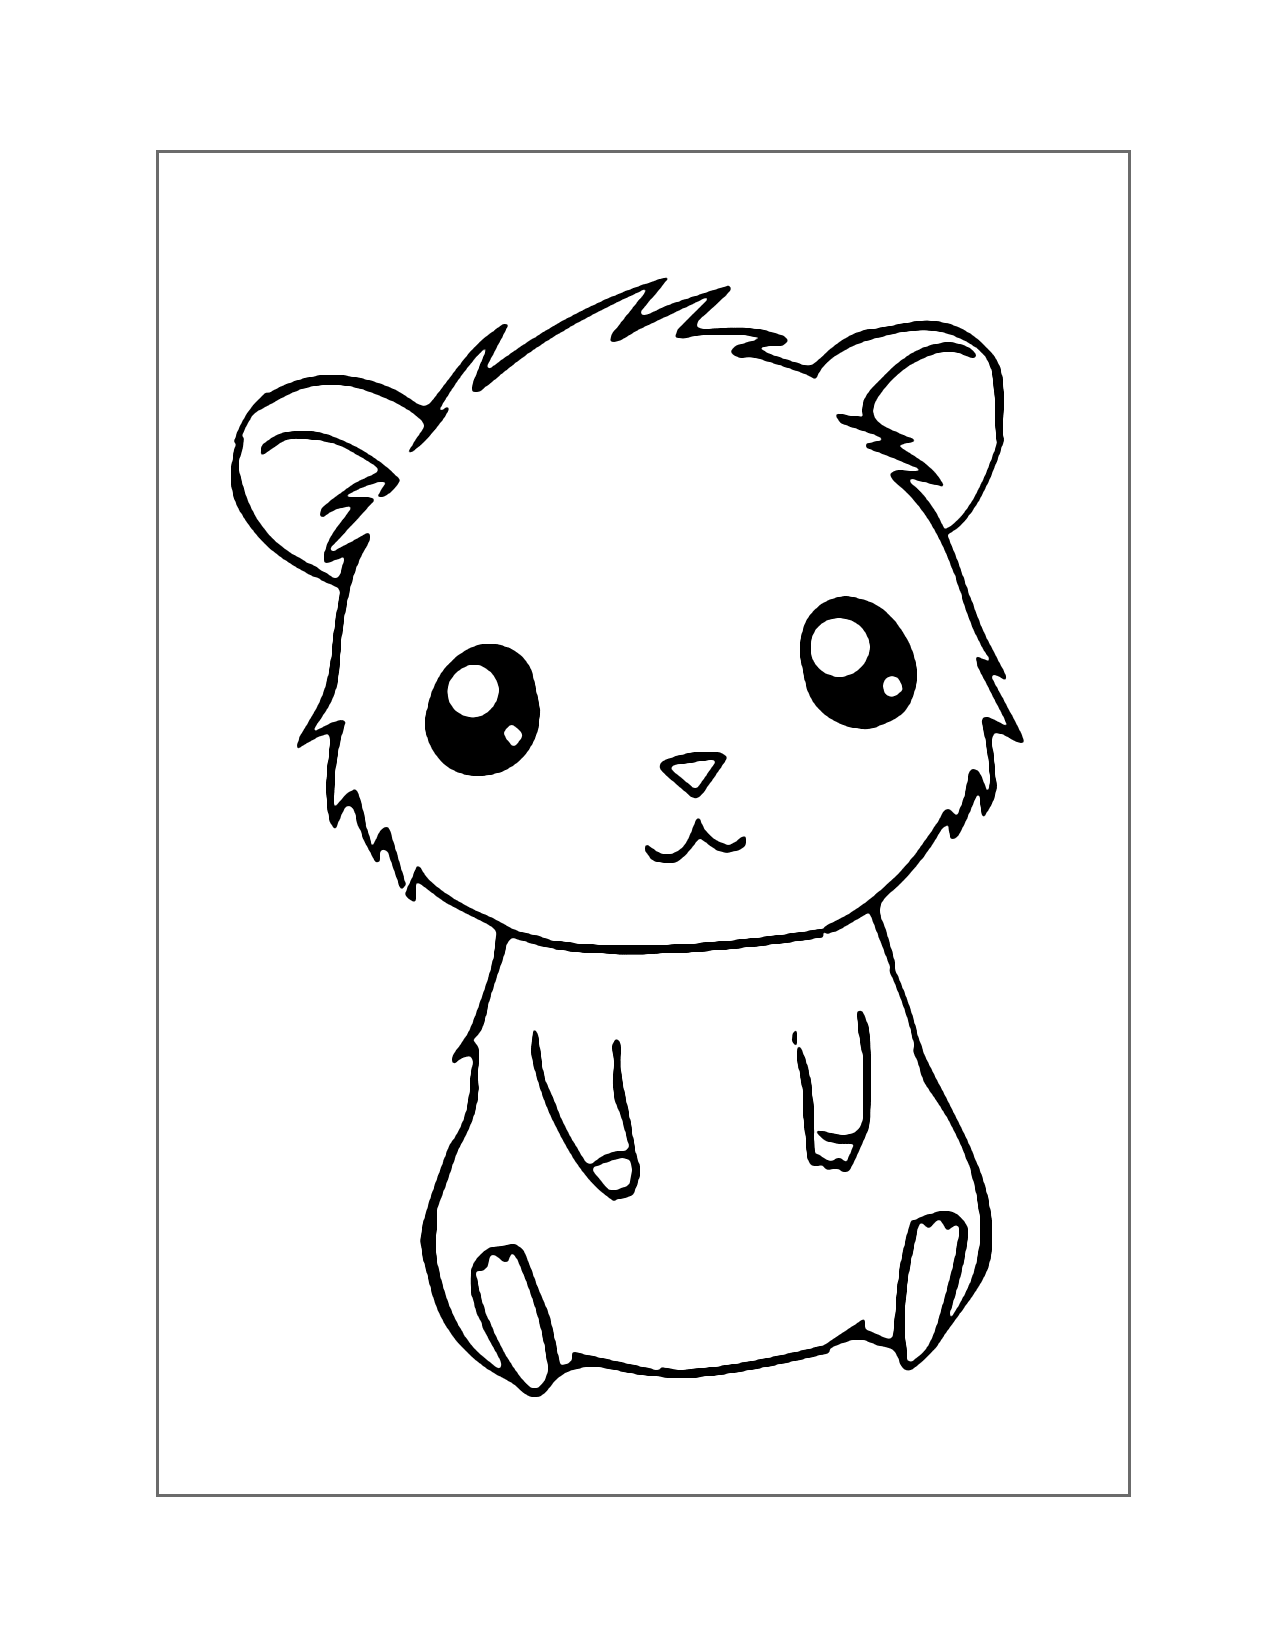 Young Hamster Coloring Page